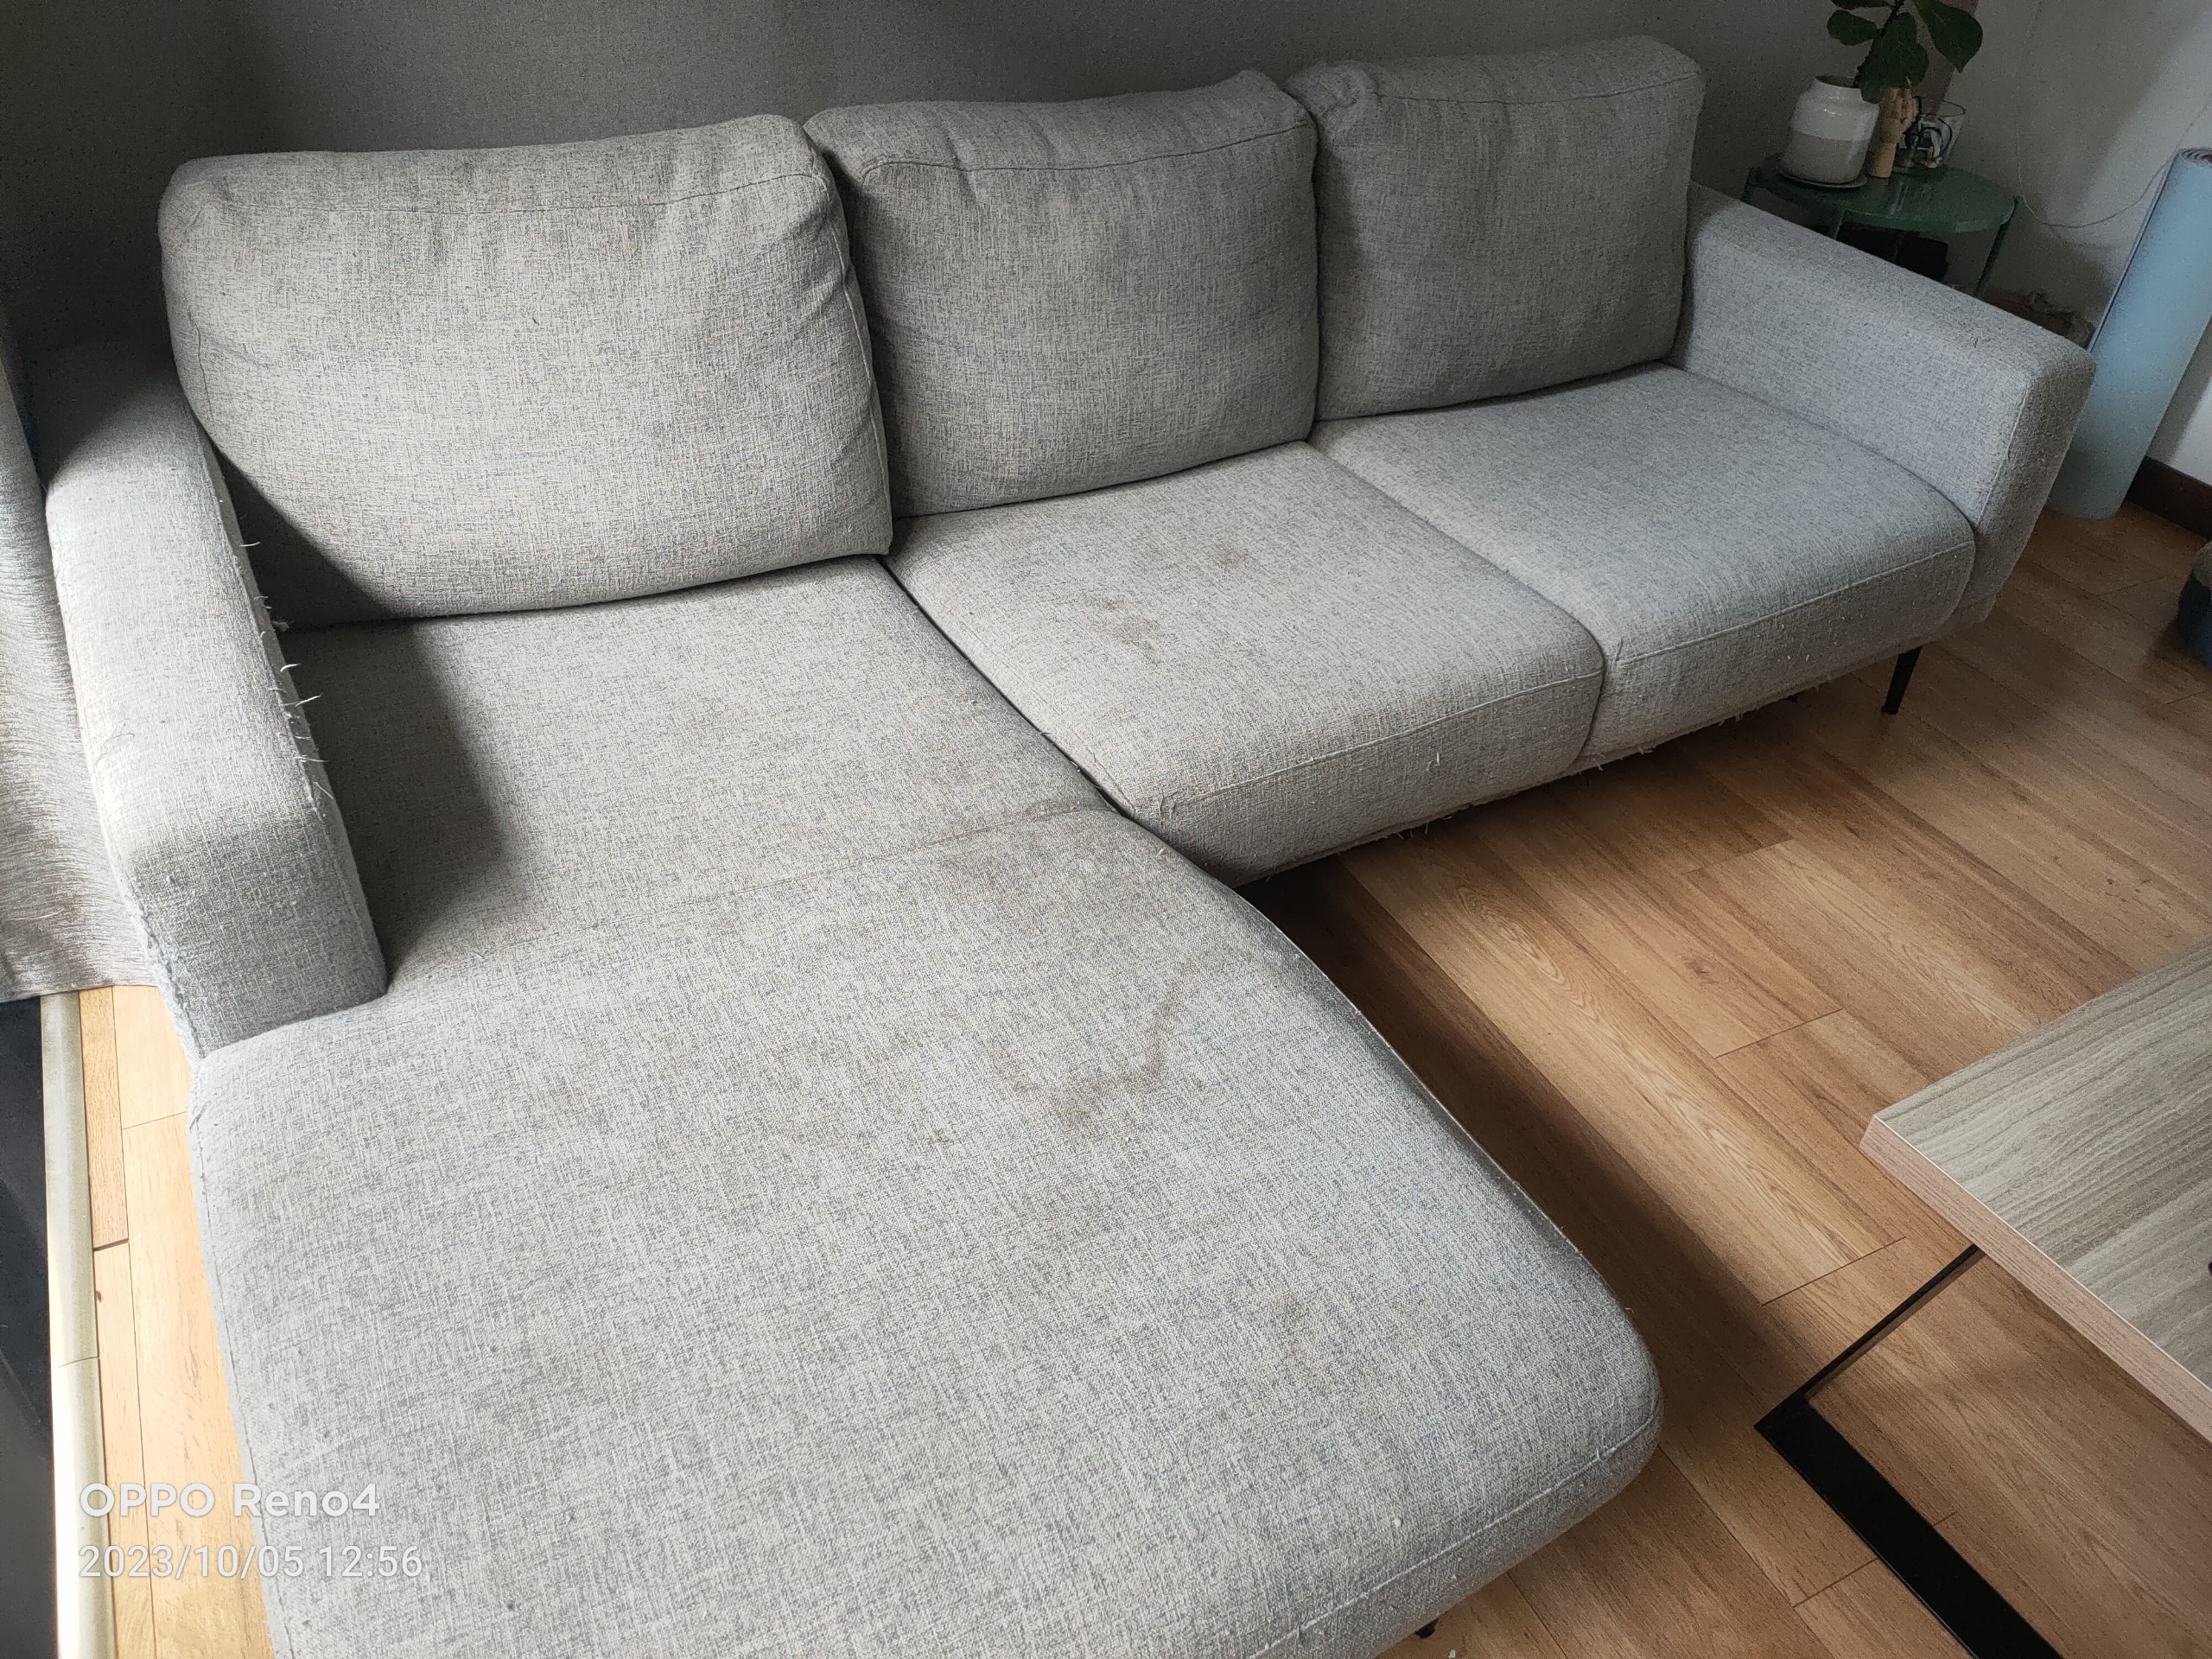 Sofa cleaning